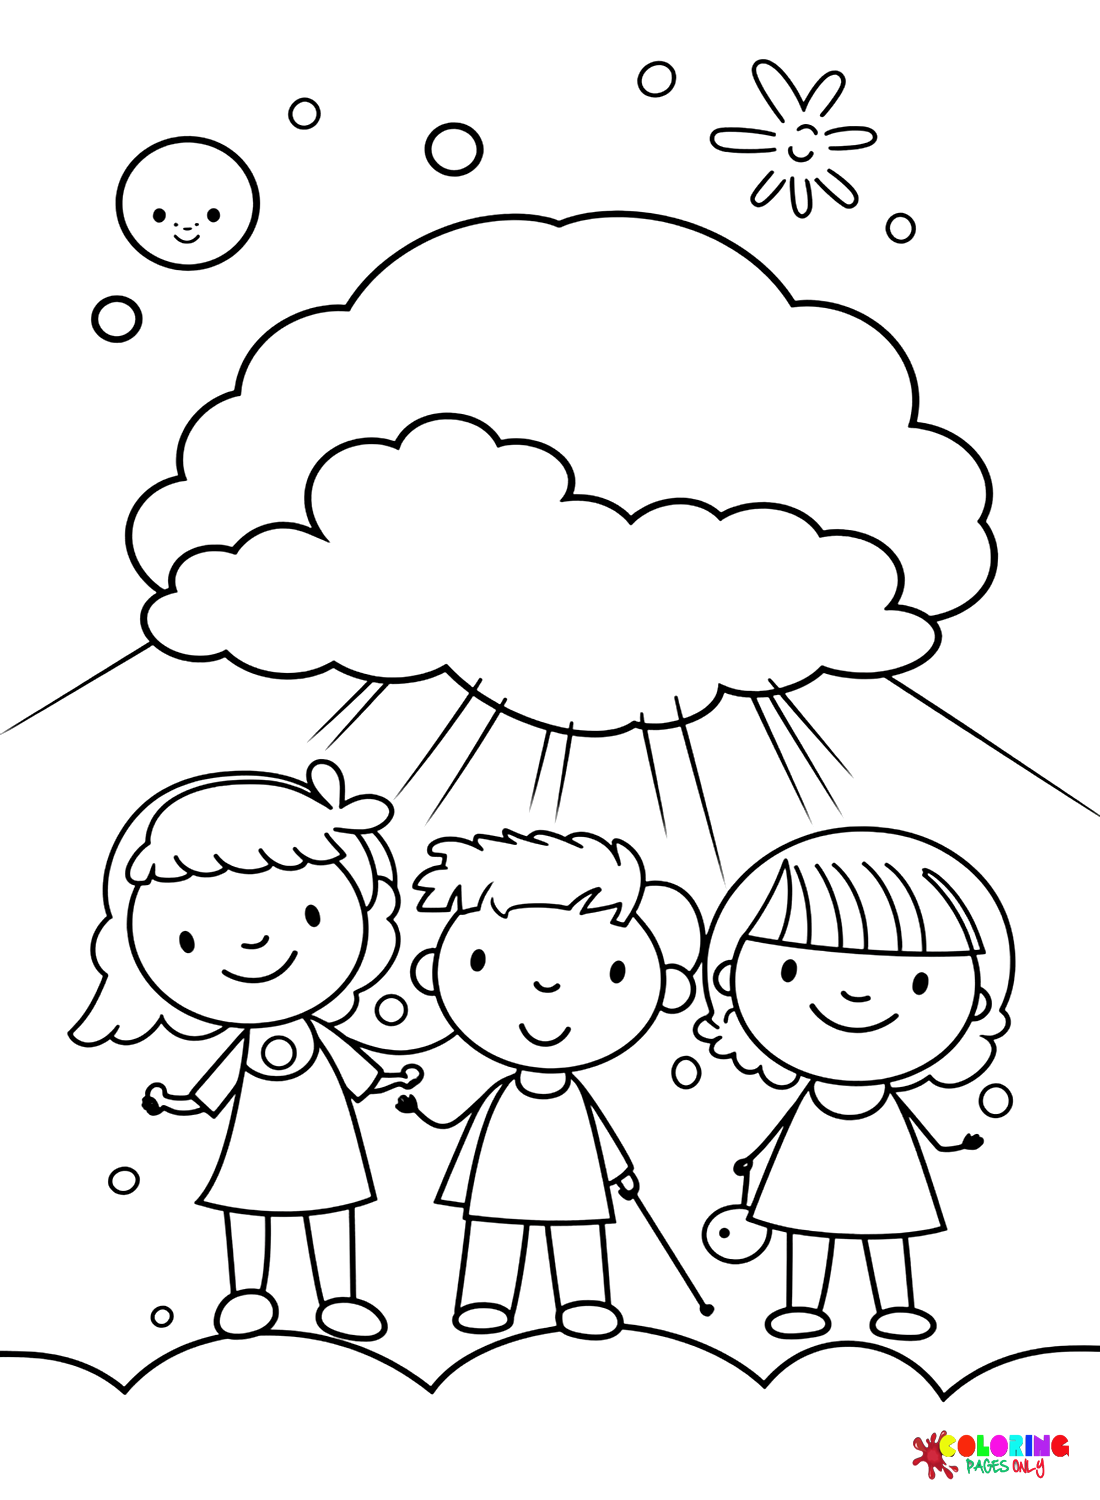 Children’s Day Images Coloring Page